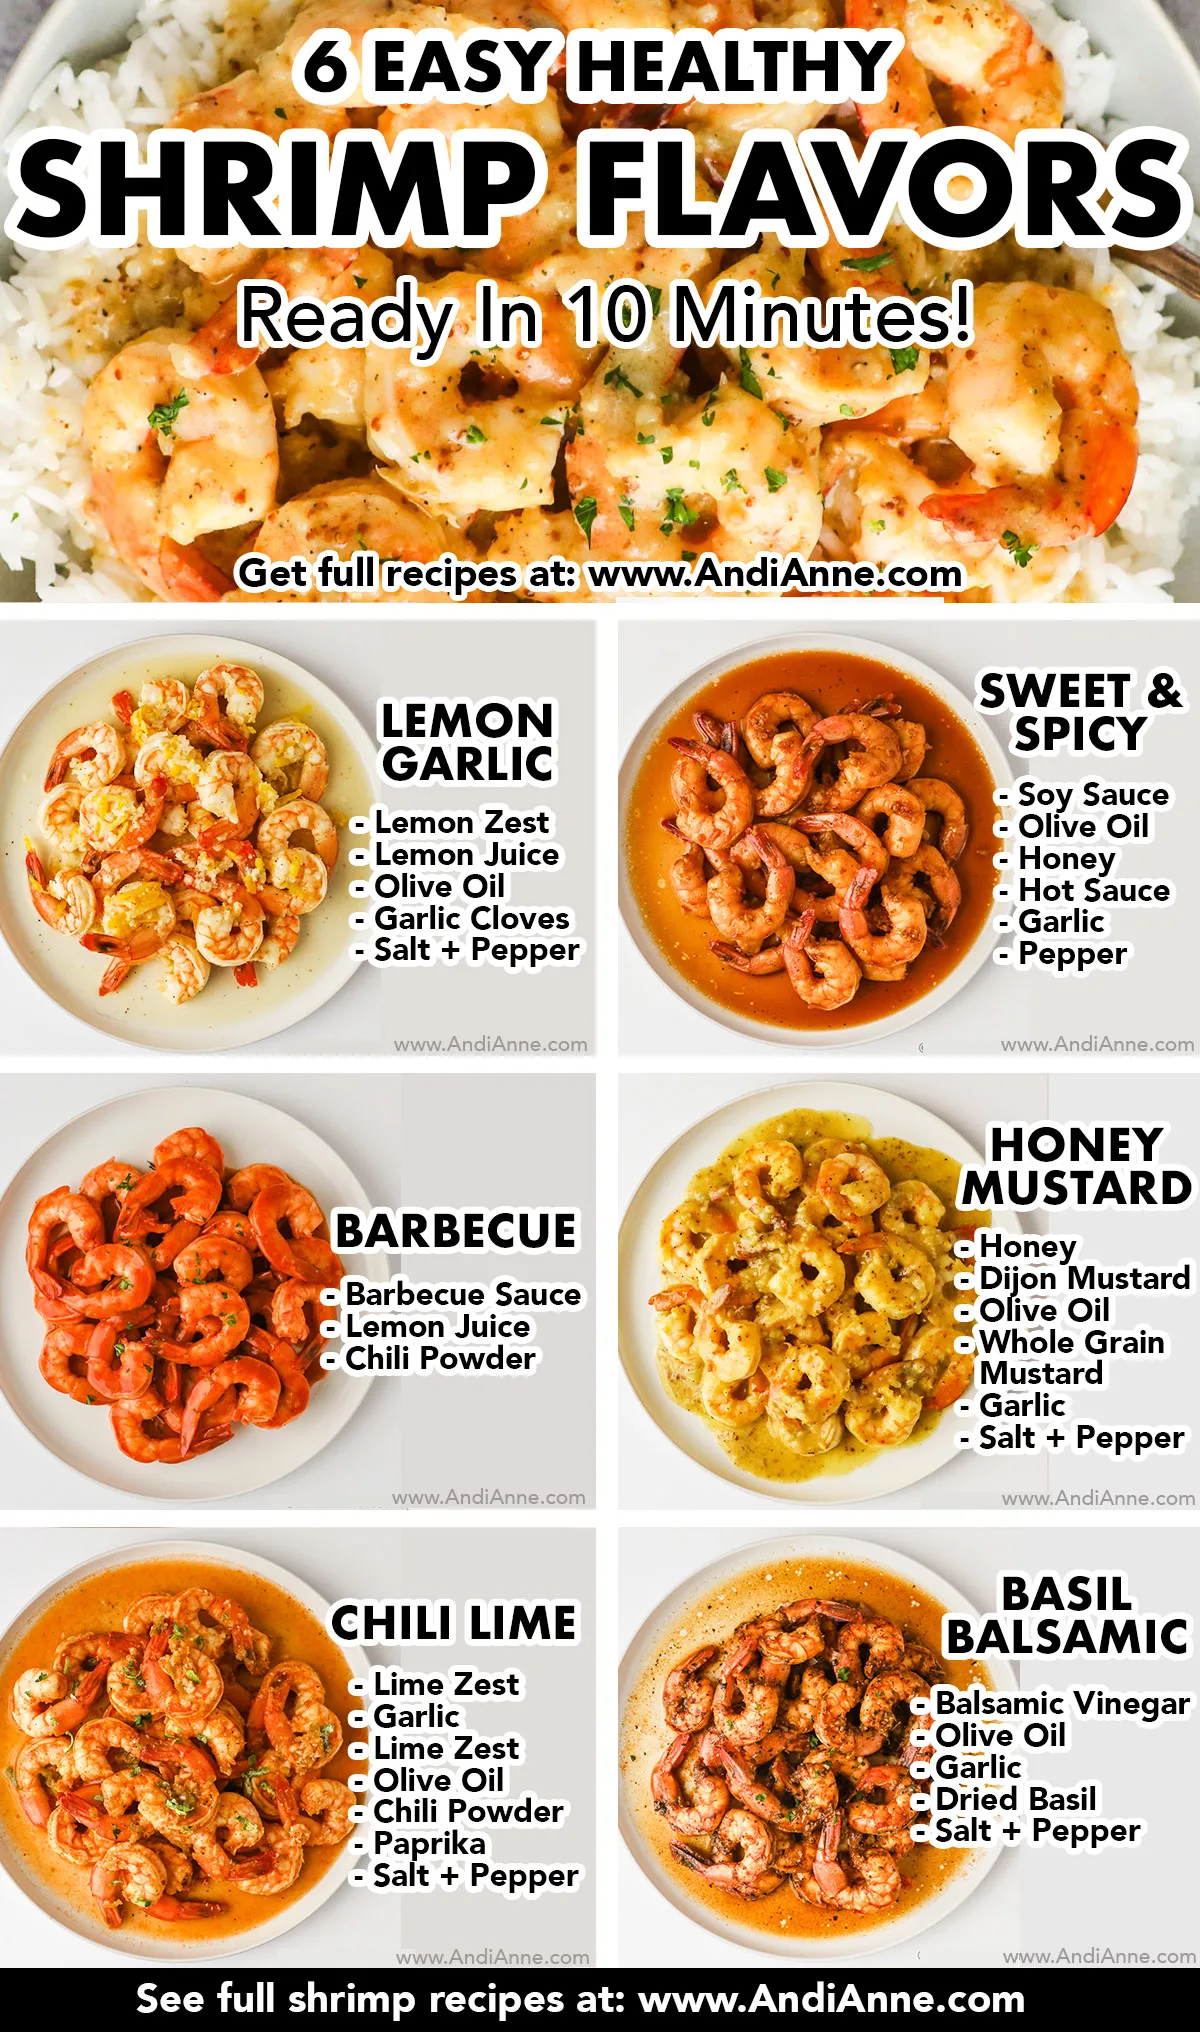 Pinterest image with title "6 easy shrimp flavors. Ready in 10 minutes" Includes six images of cooked shrimp on plates, all with different flavored sauces. Each one includes a list of ingredients beside for the sauces. Sauce names include lemon garlic, sweet and spicy, barbecue, honey mustard, chili lime and basil balsamic